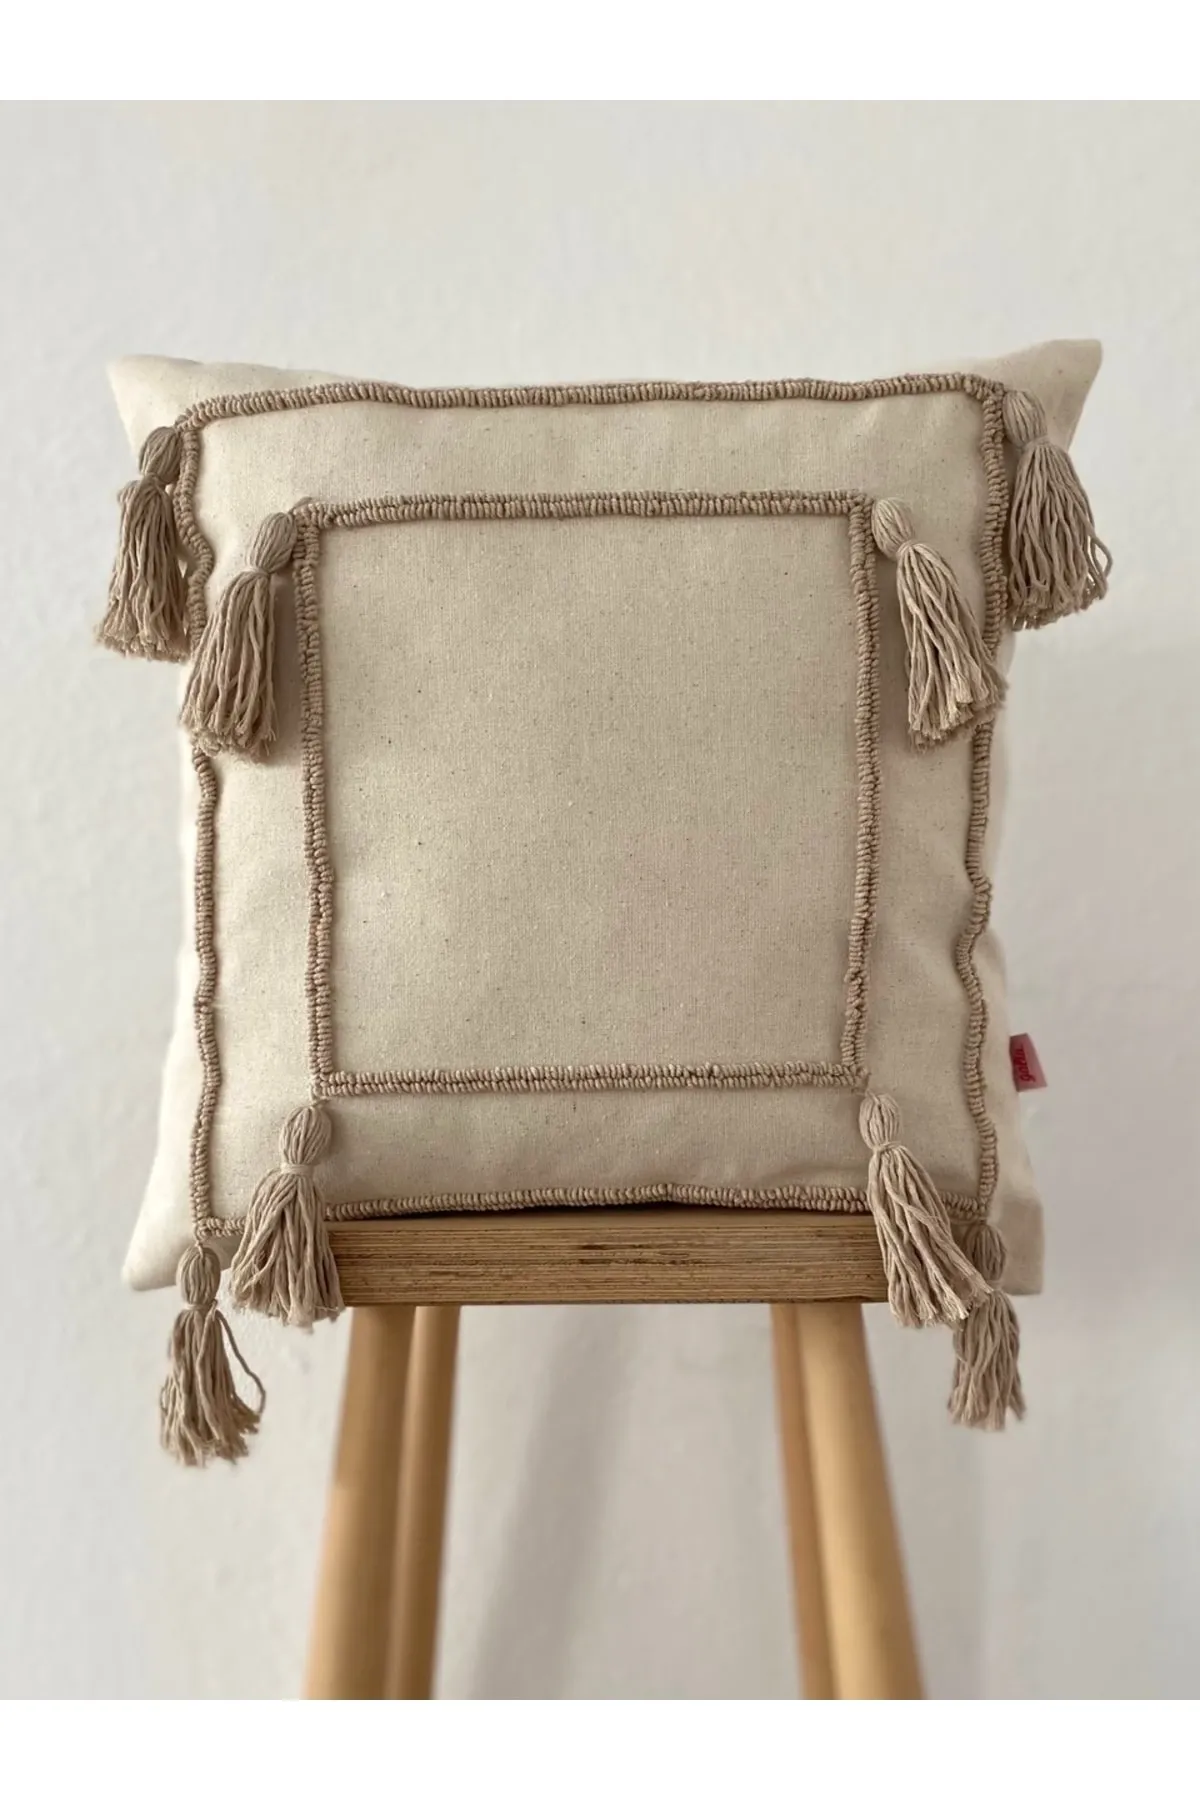 Bohemian Beige Tasseled Washed Linen Punch Cushion Cover